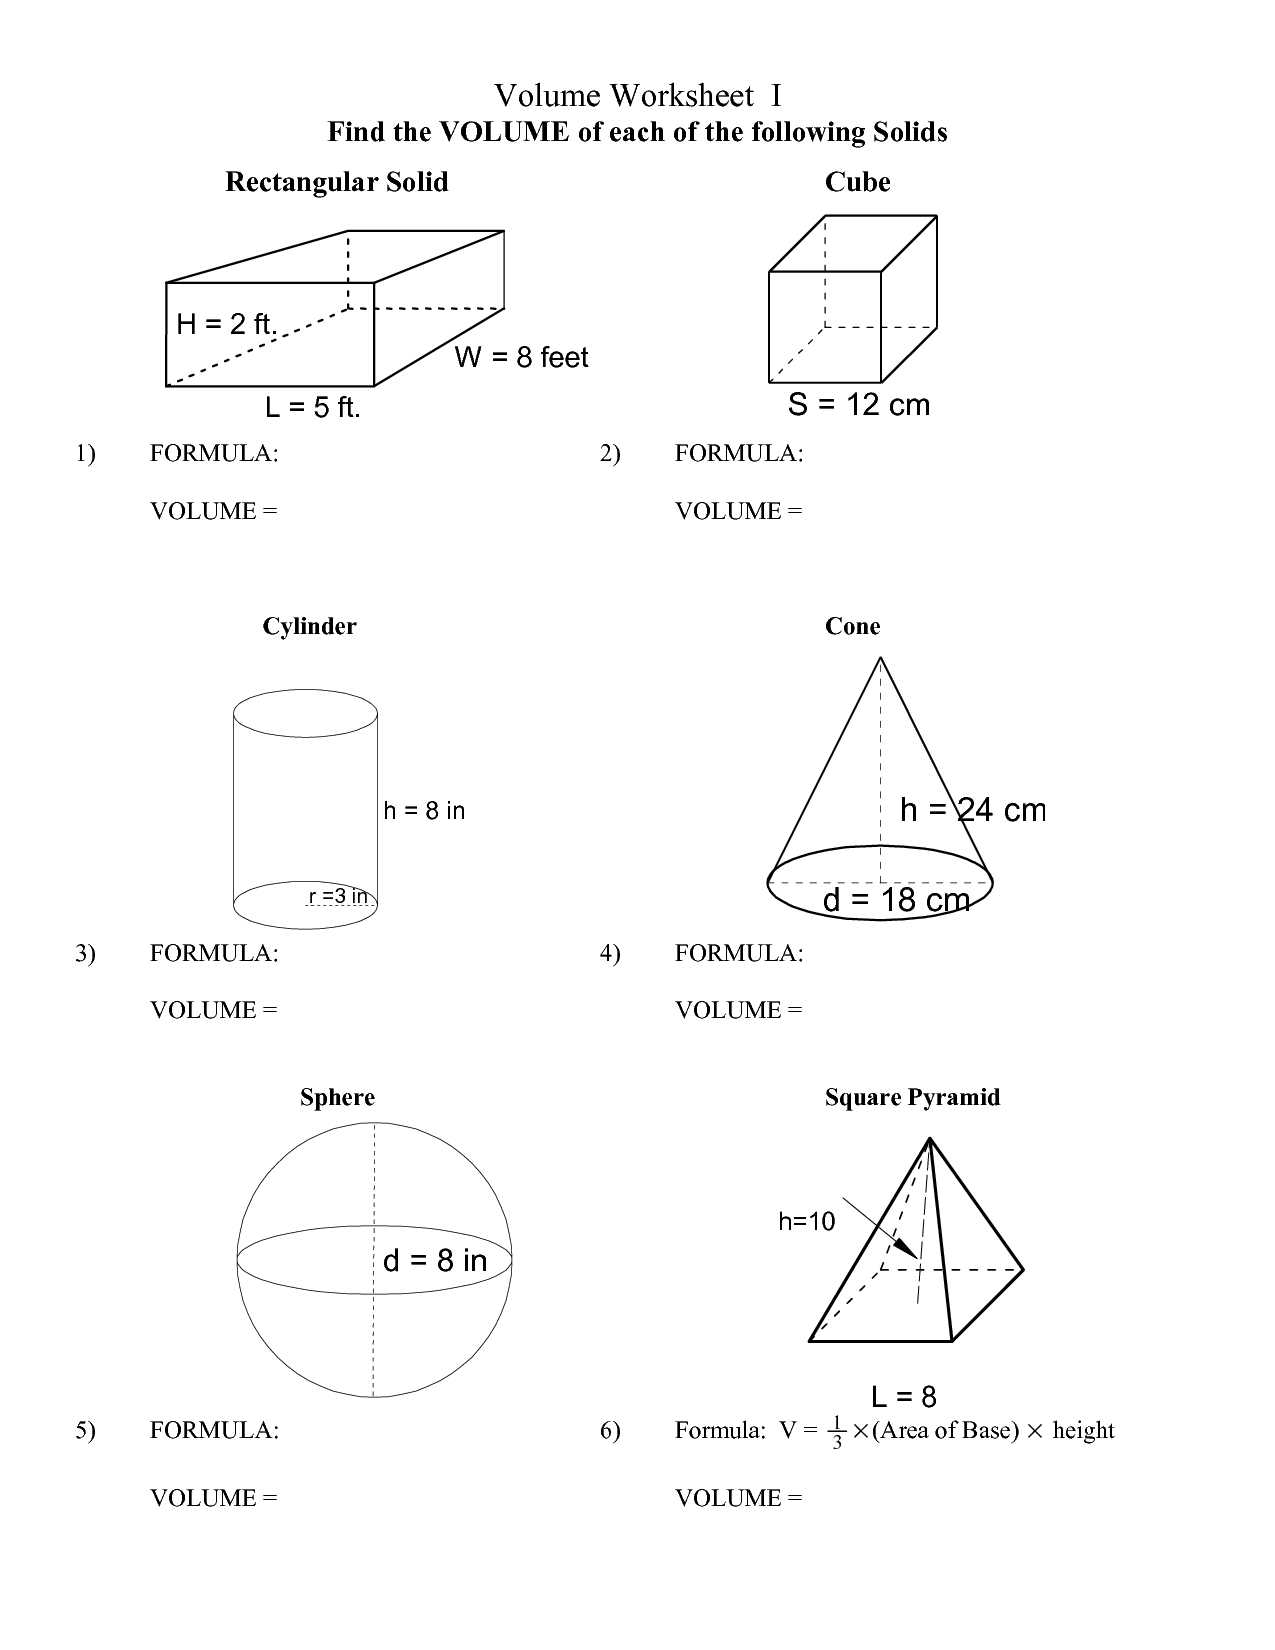 Surface area Of Prisms and Cylinders Worksheet Answers Along with Volume Pyramid and Cone Worksheet the Best Worksheets Image